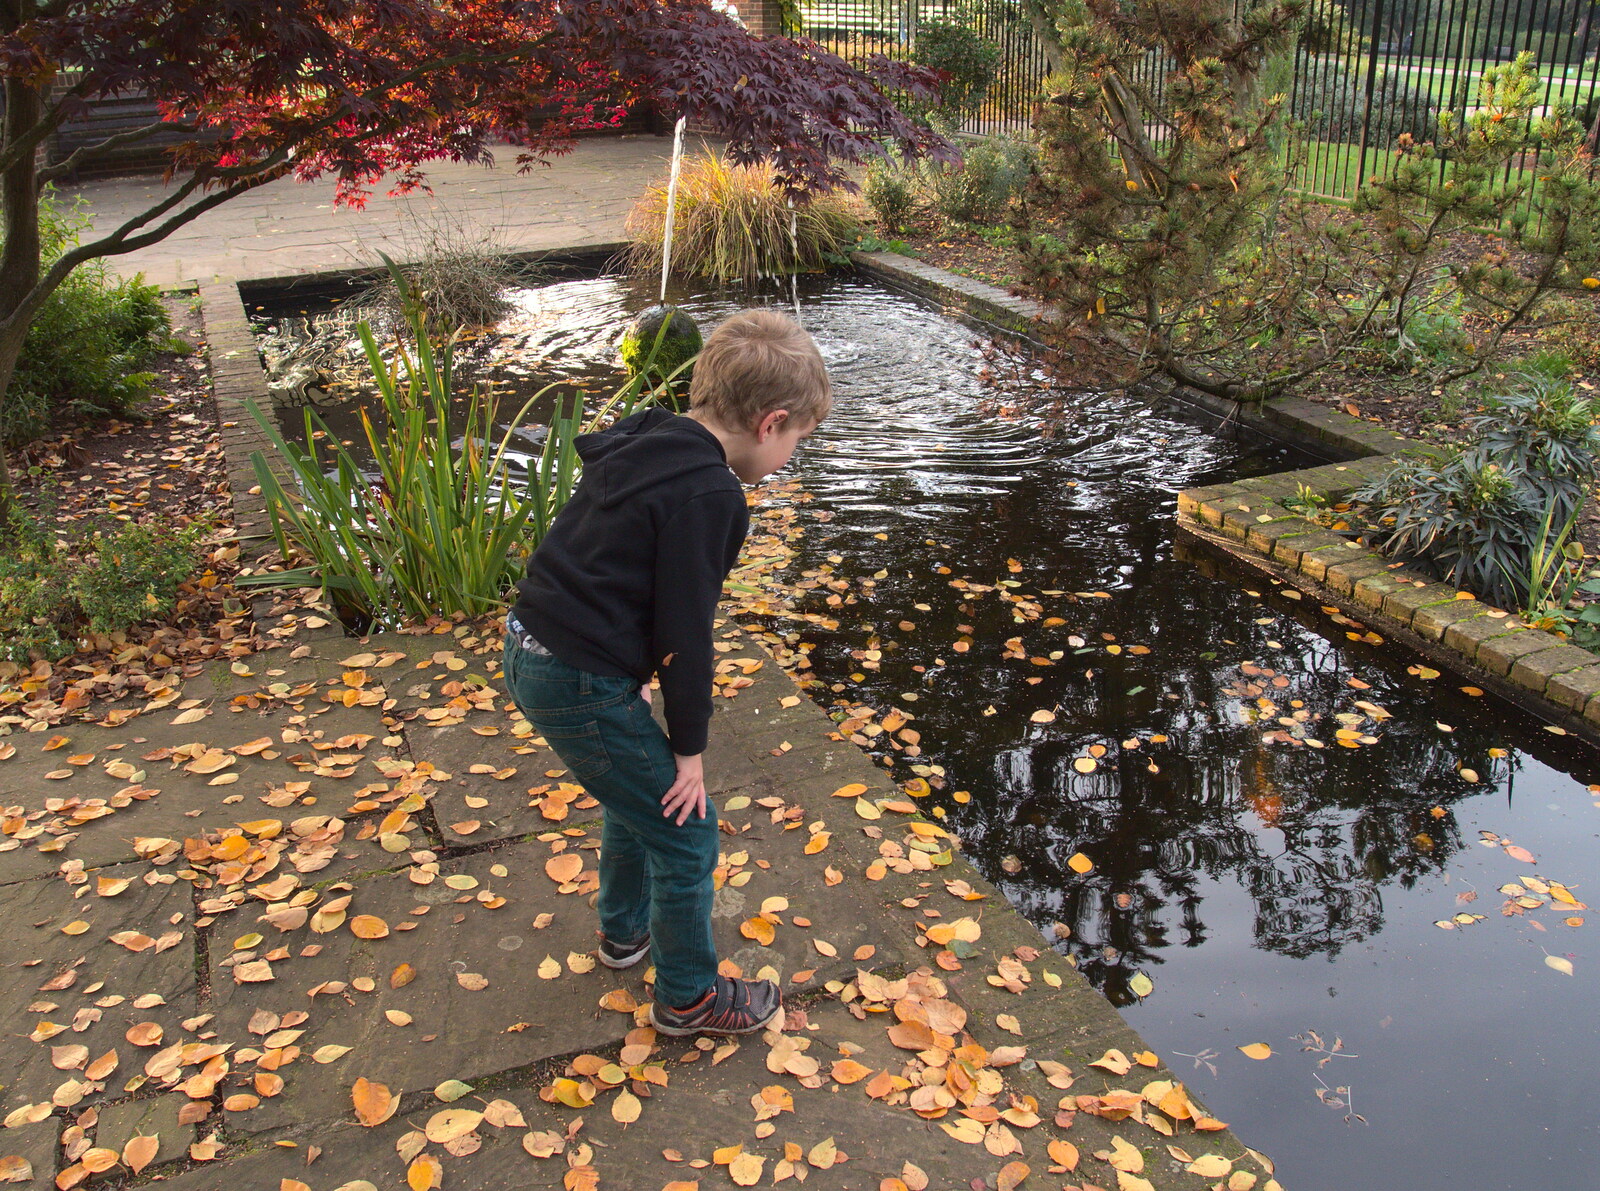 Fred peers into a pond from Abbey Gardens in Autumn, Bury St. Edmunds, Suffolk - 27th October 2015